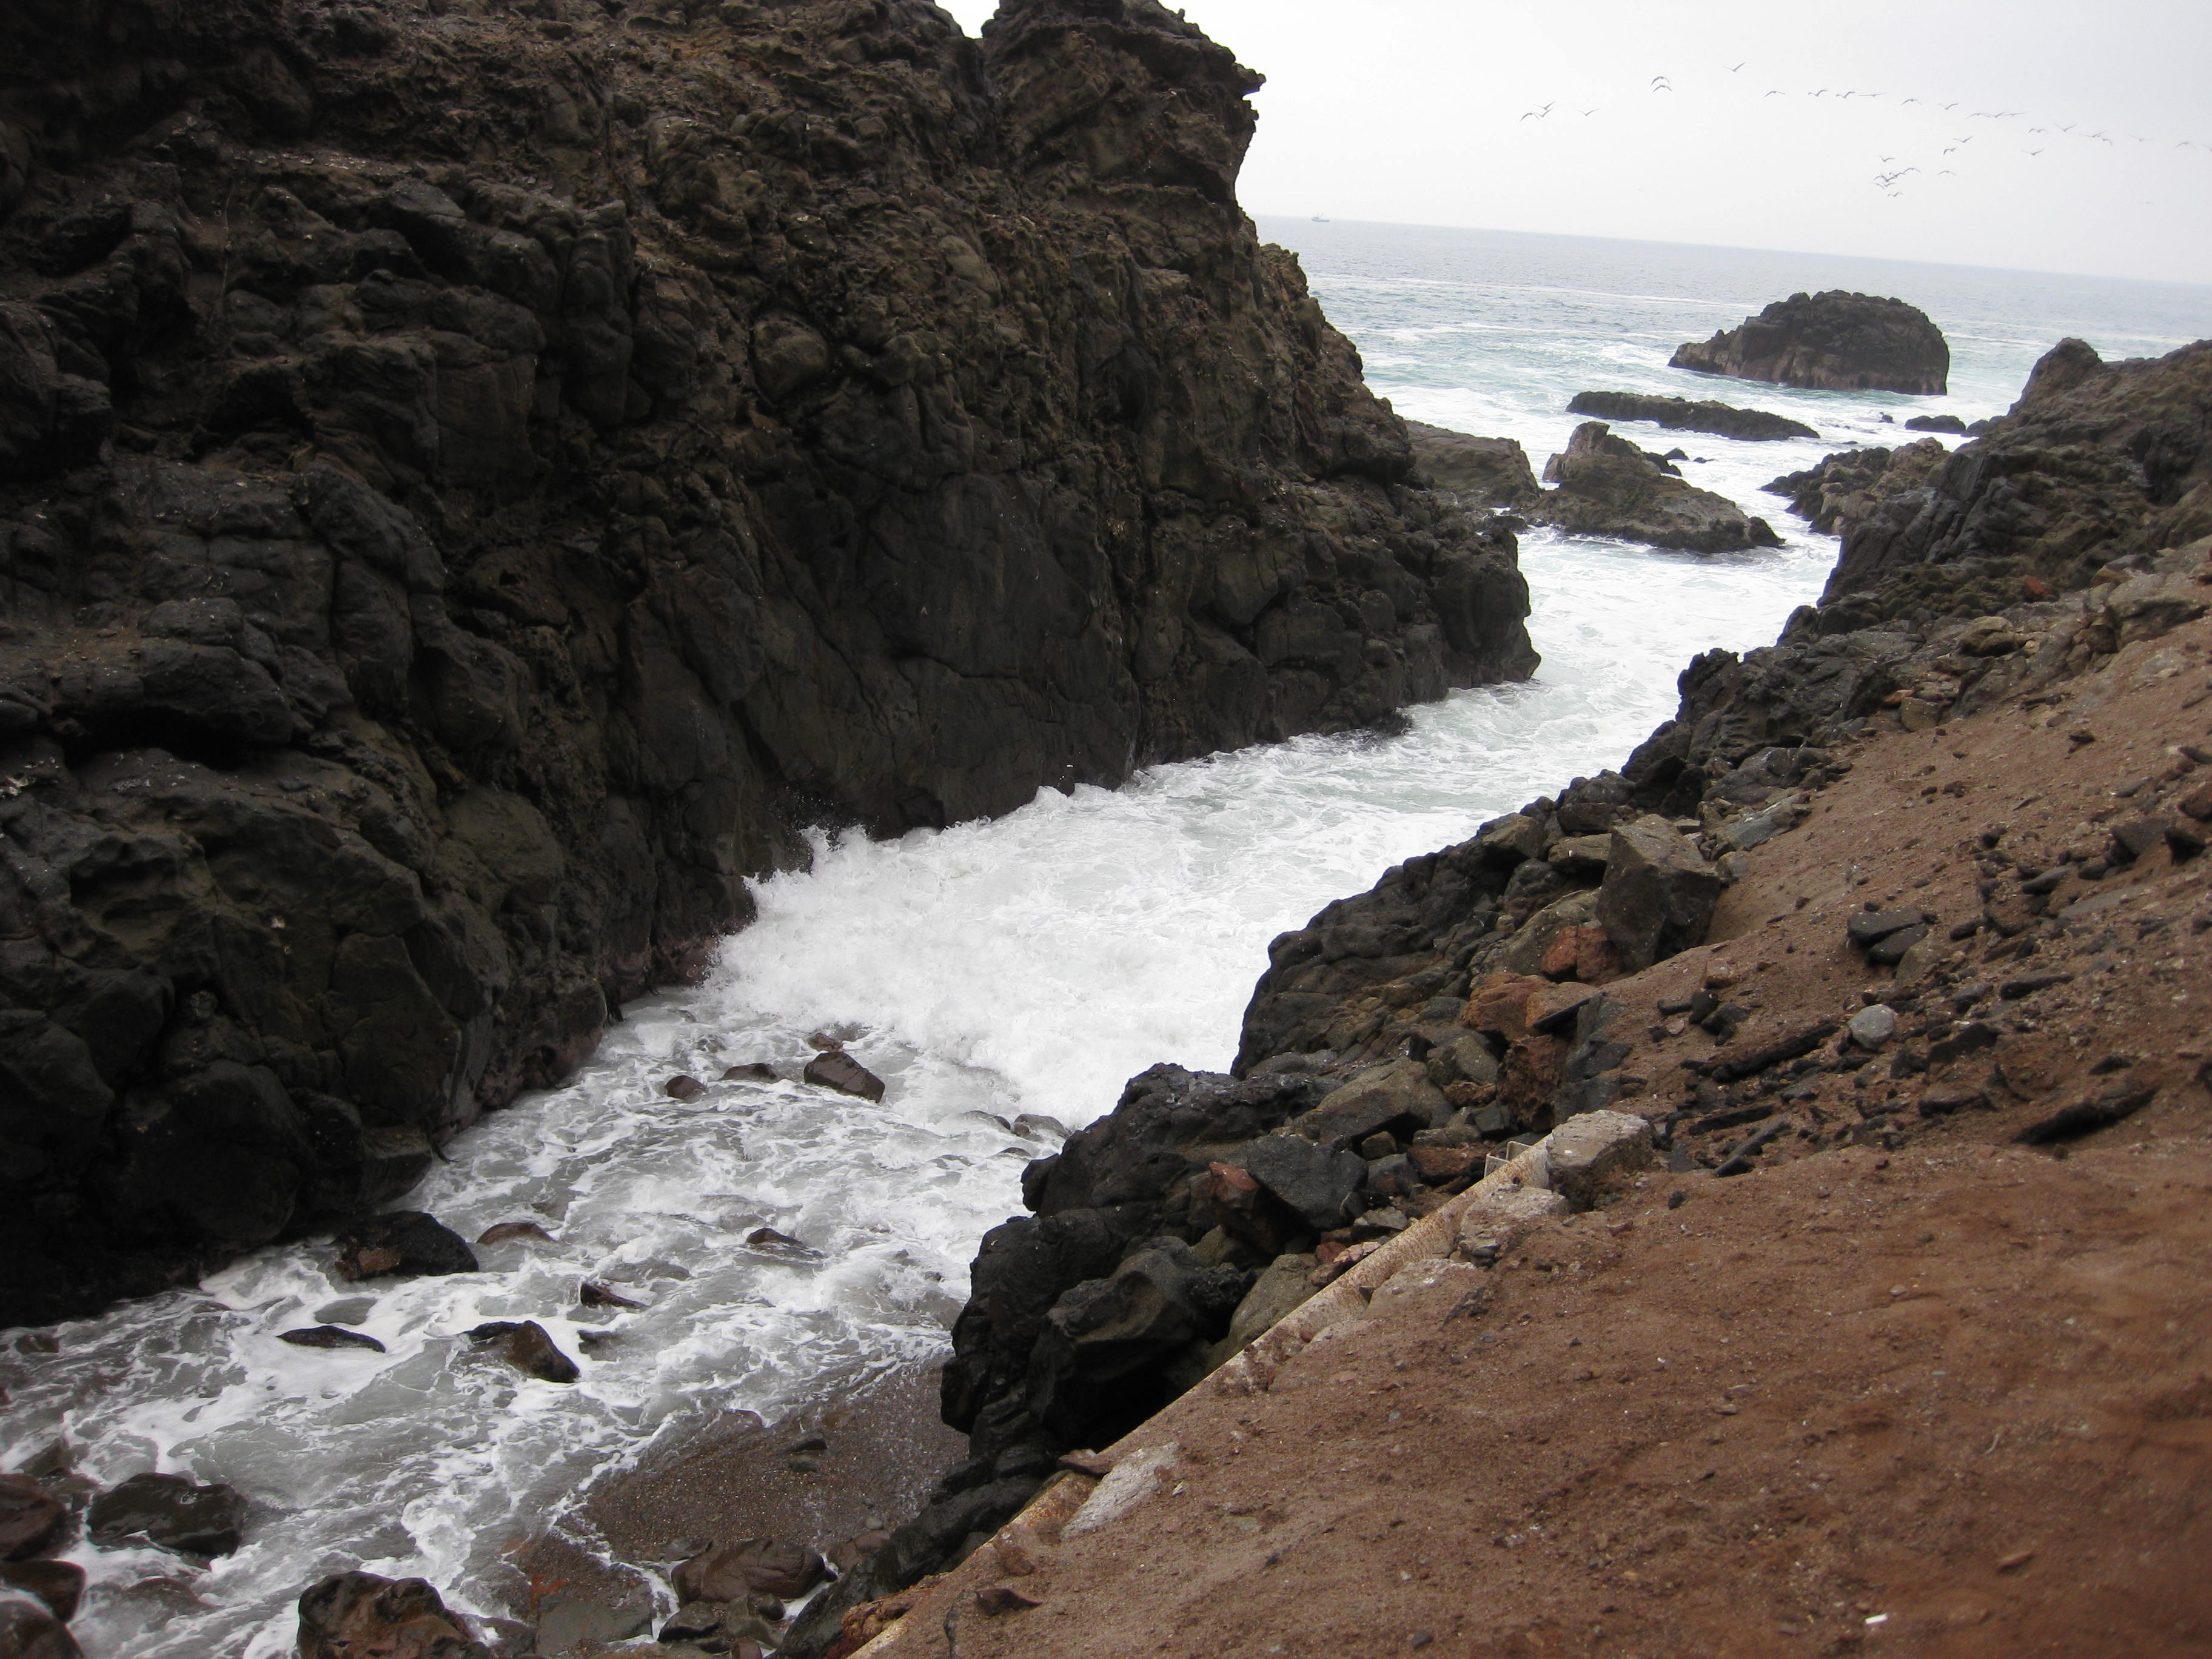 A tributary to the Pacific Ocean 